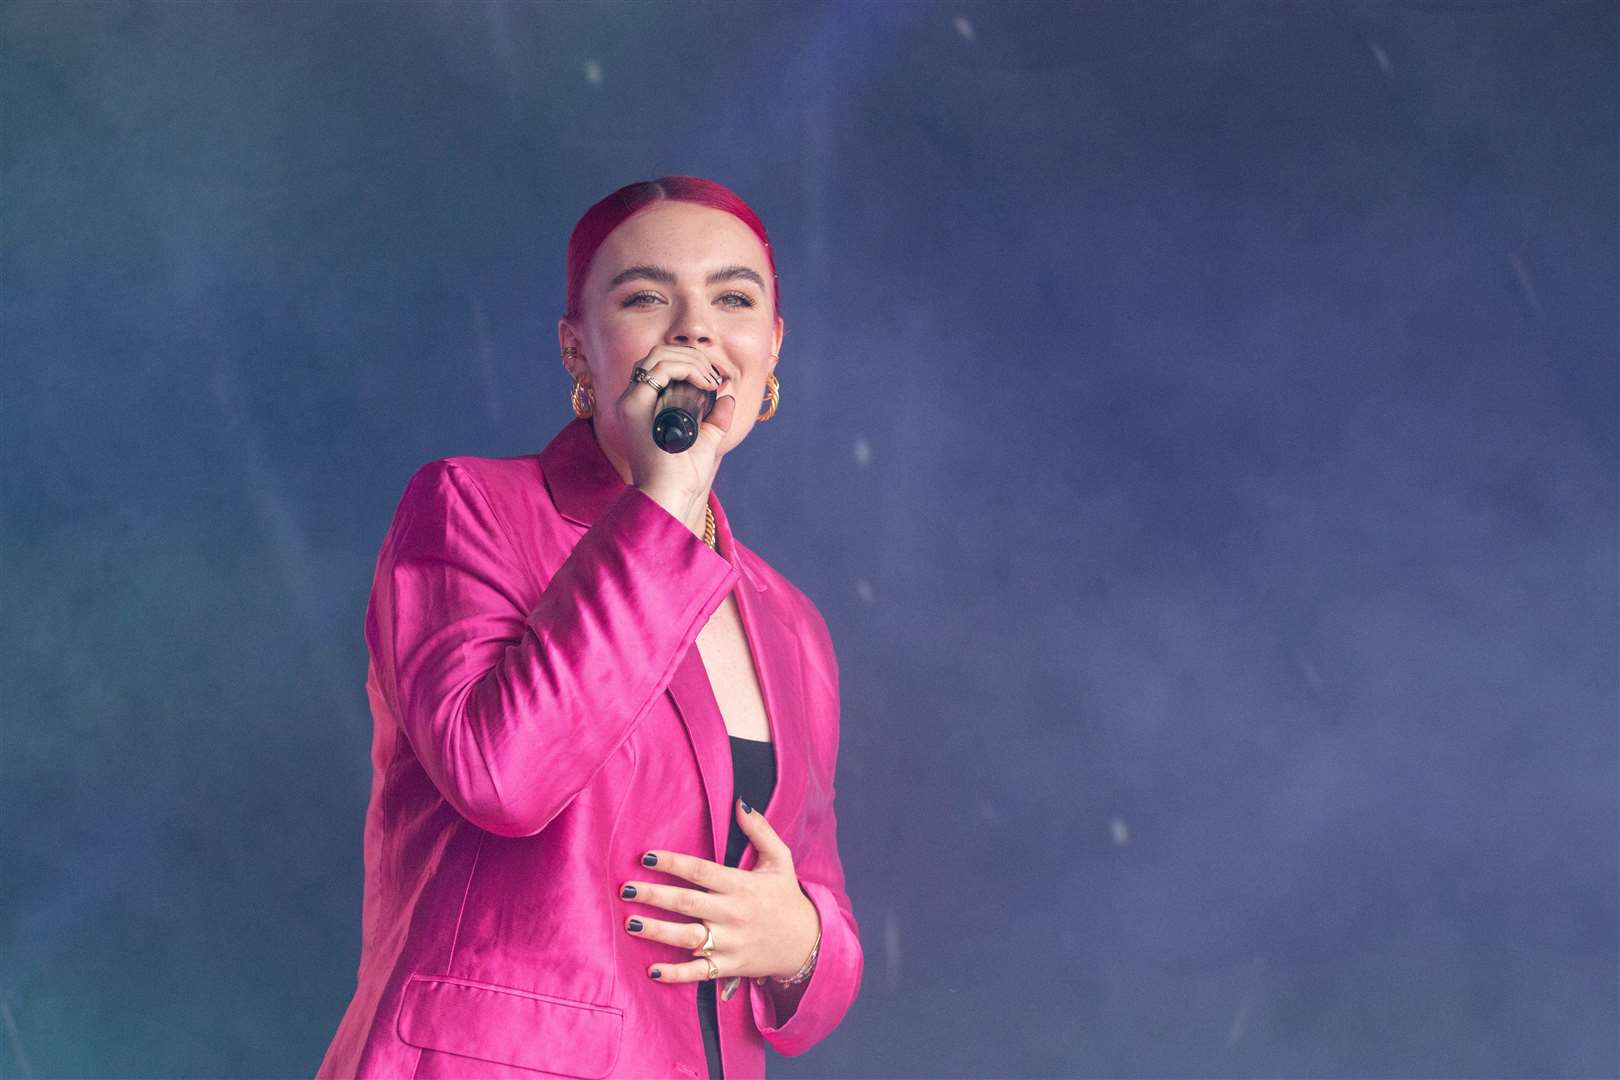 Eden Hunter on the main stage at Dover Pride. Photo: Dover Pride/David Goodson Photography